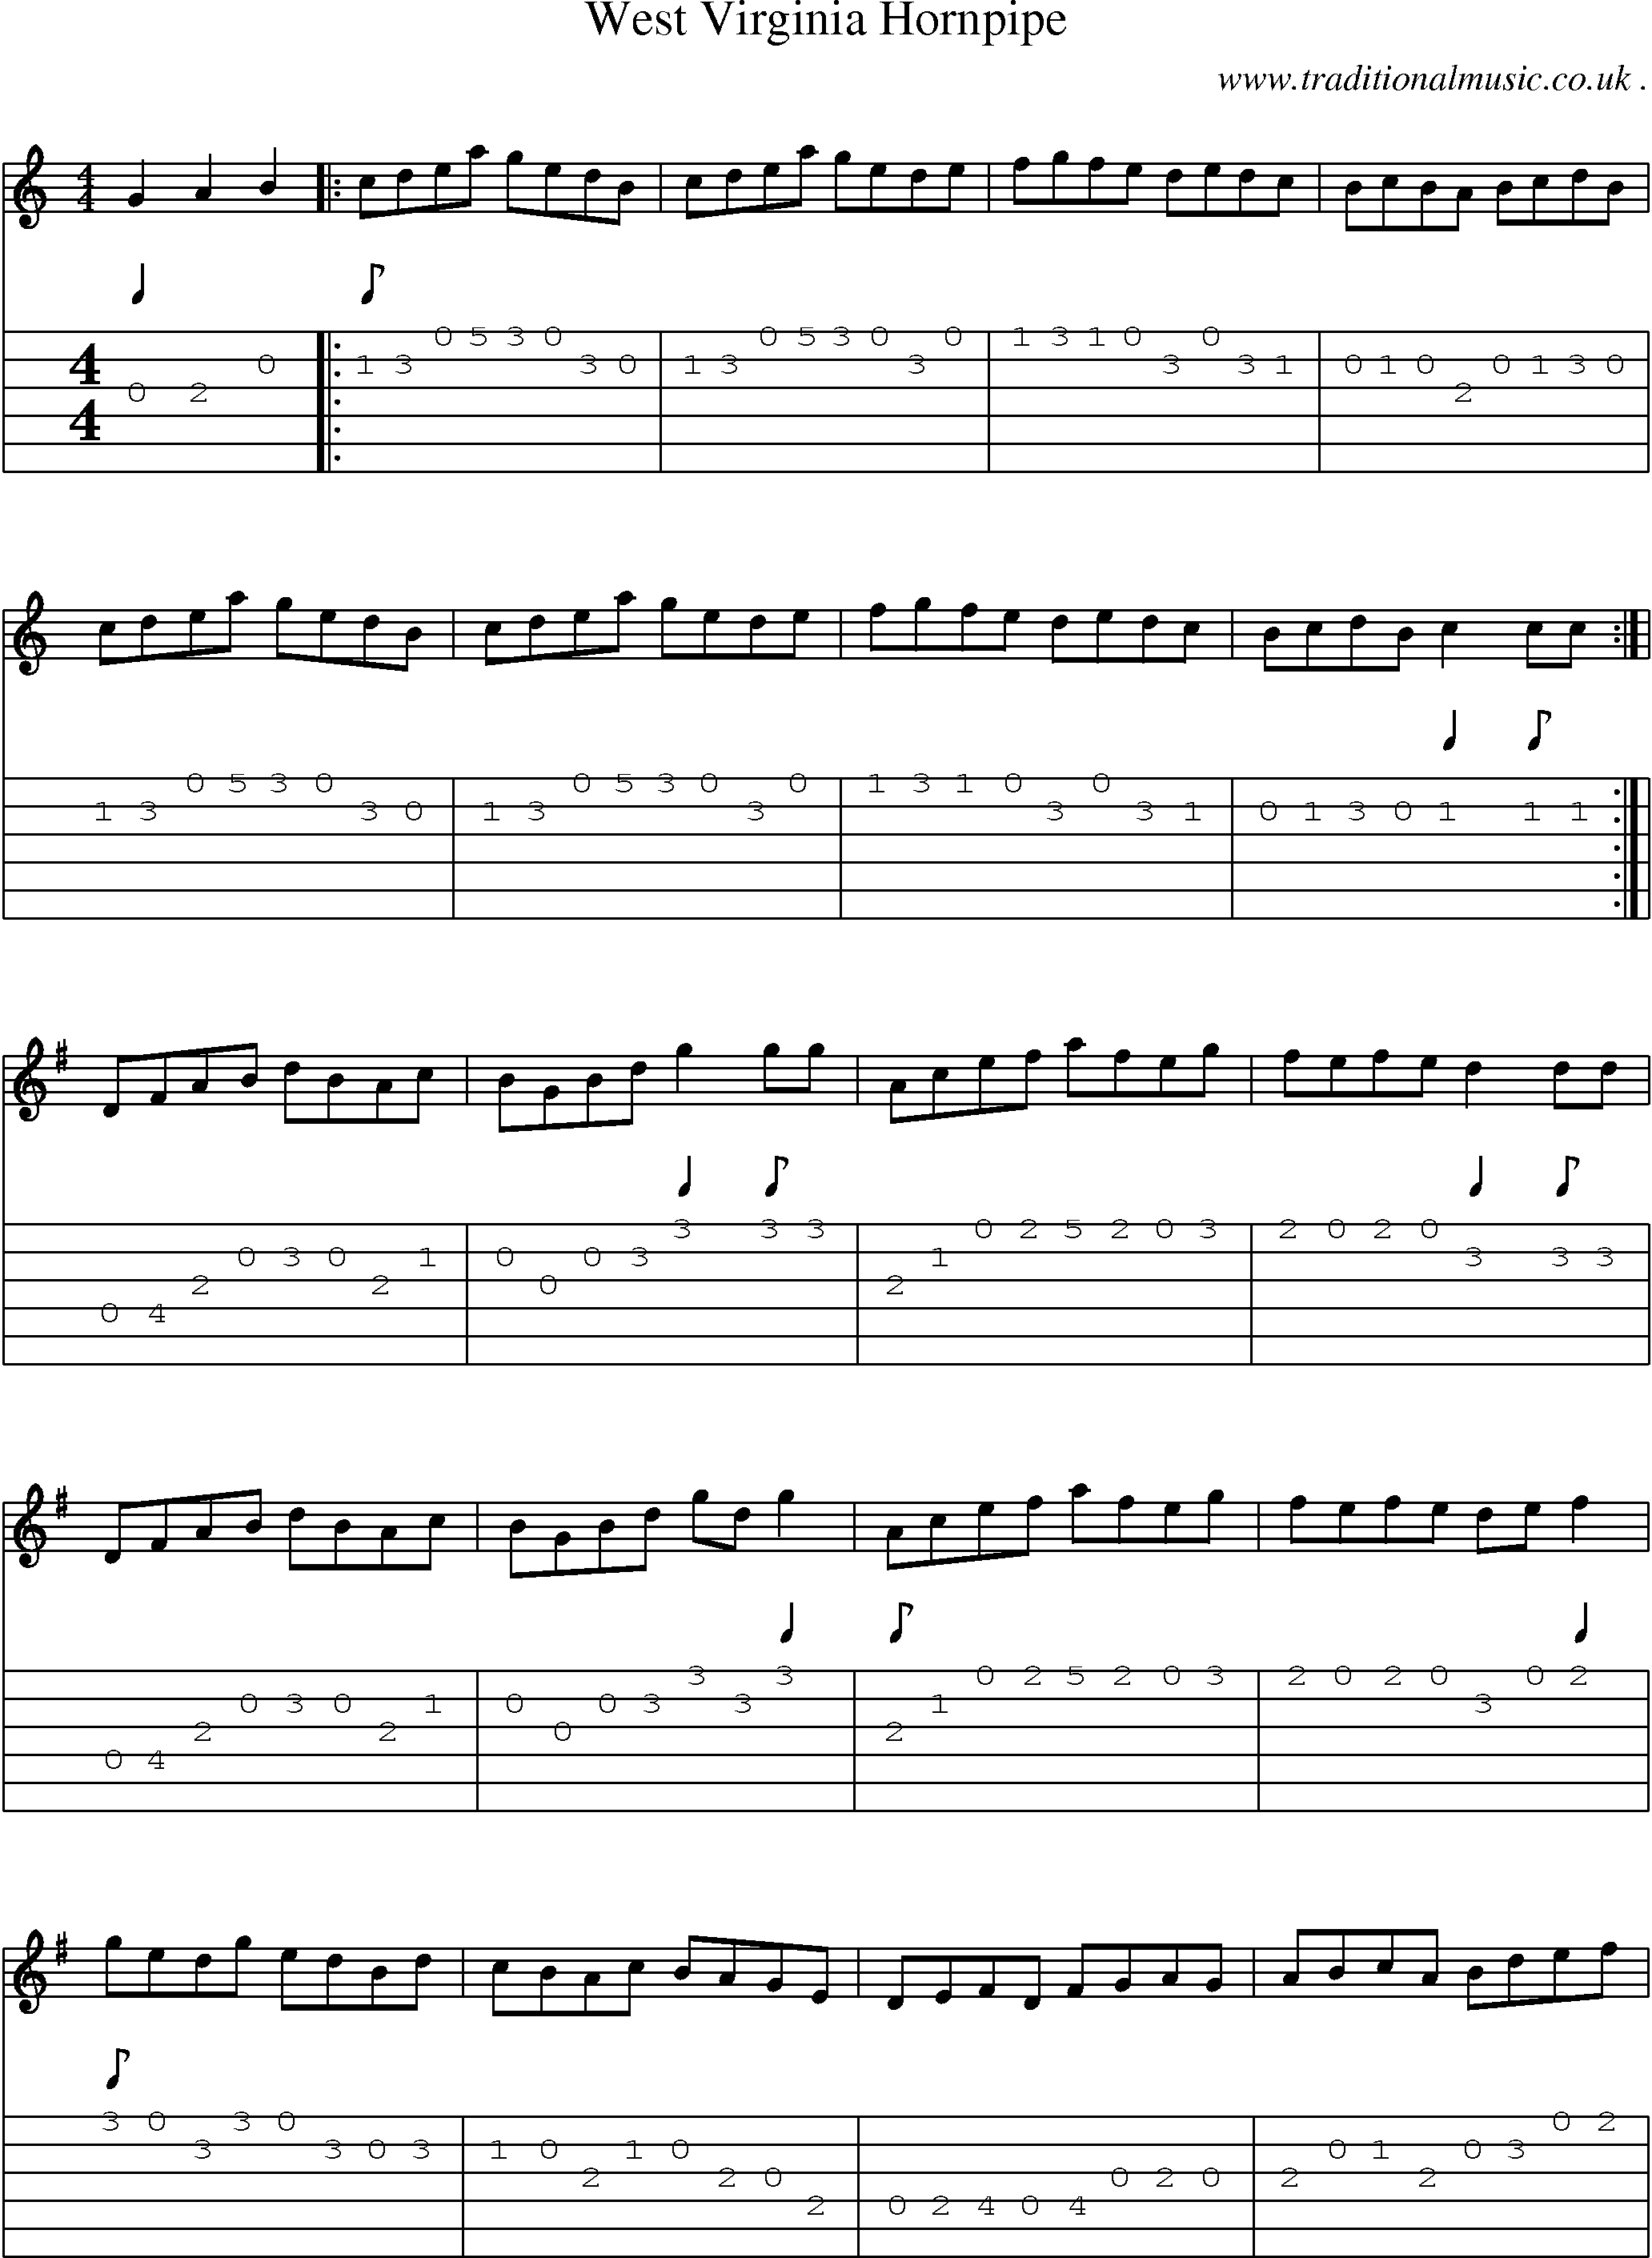 Music Score and Guitar Tabs for West Virginia Hornpipe